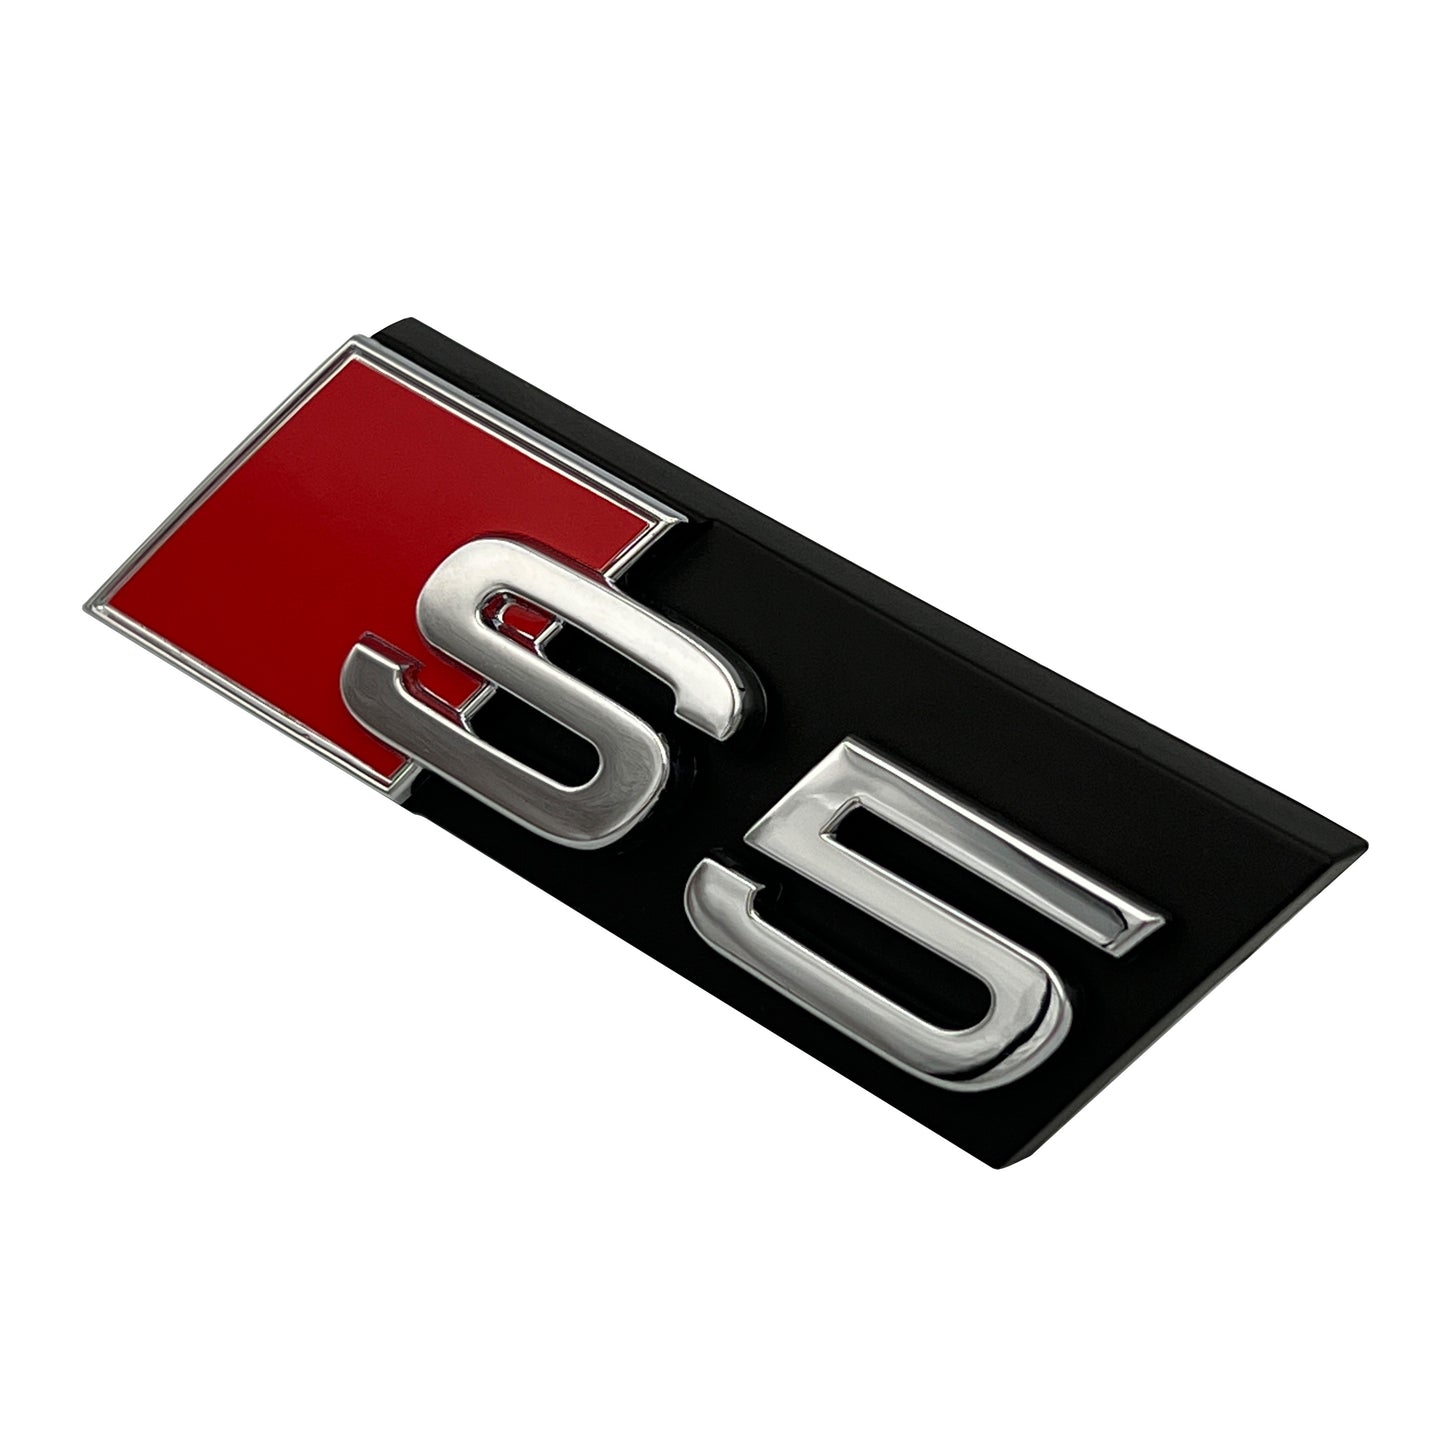 Audi S5 Front Grill Emblem Chrome fit A5 S5 Hood Grille Badge Nameplate OE Spec